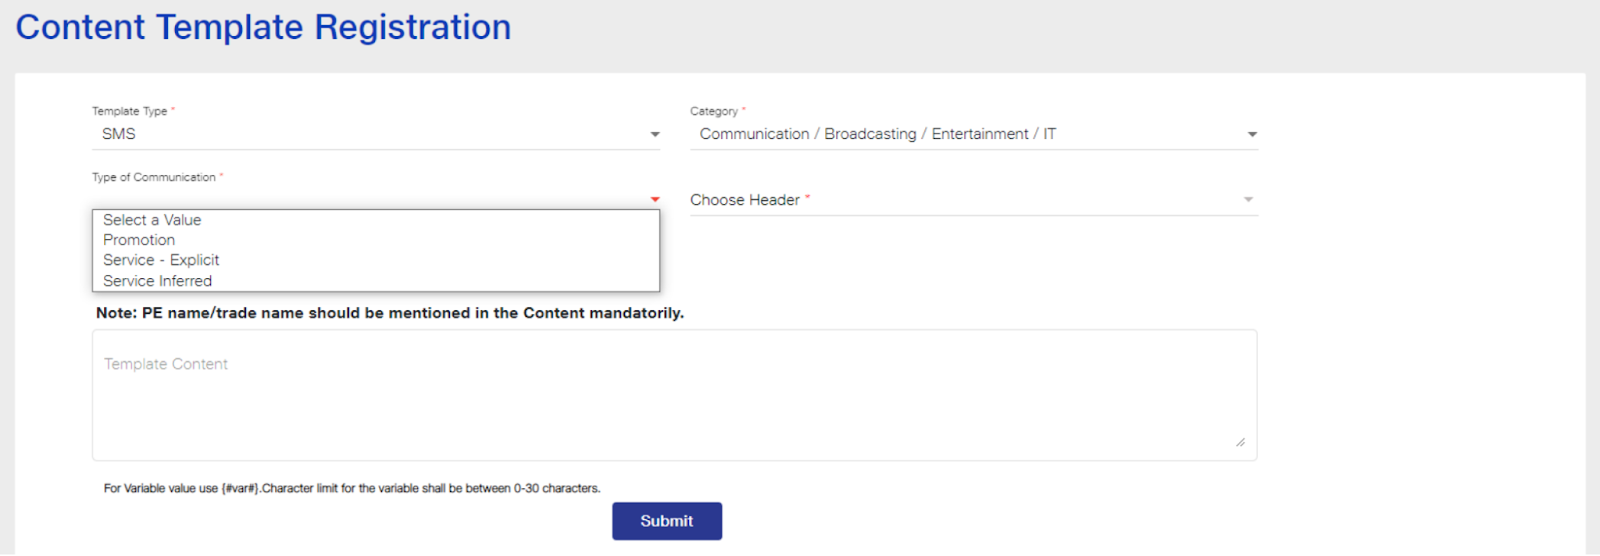 content template registration process on Jio DLT portal | SMSCountry